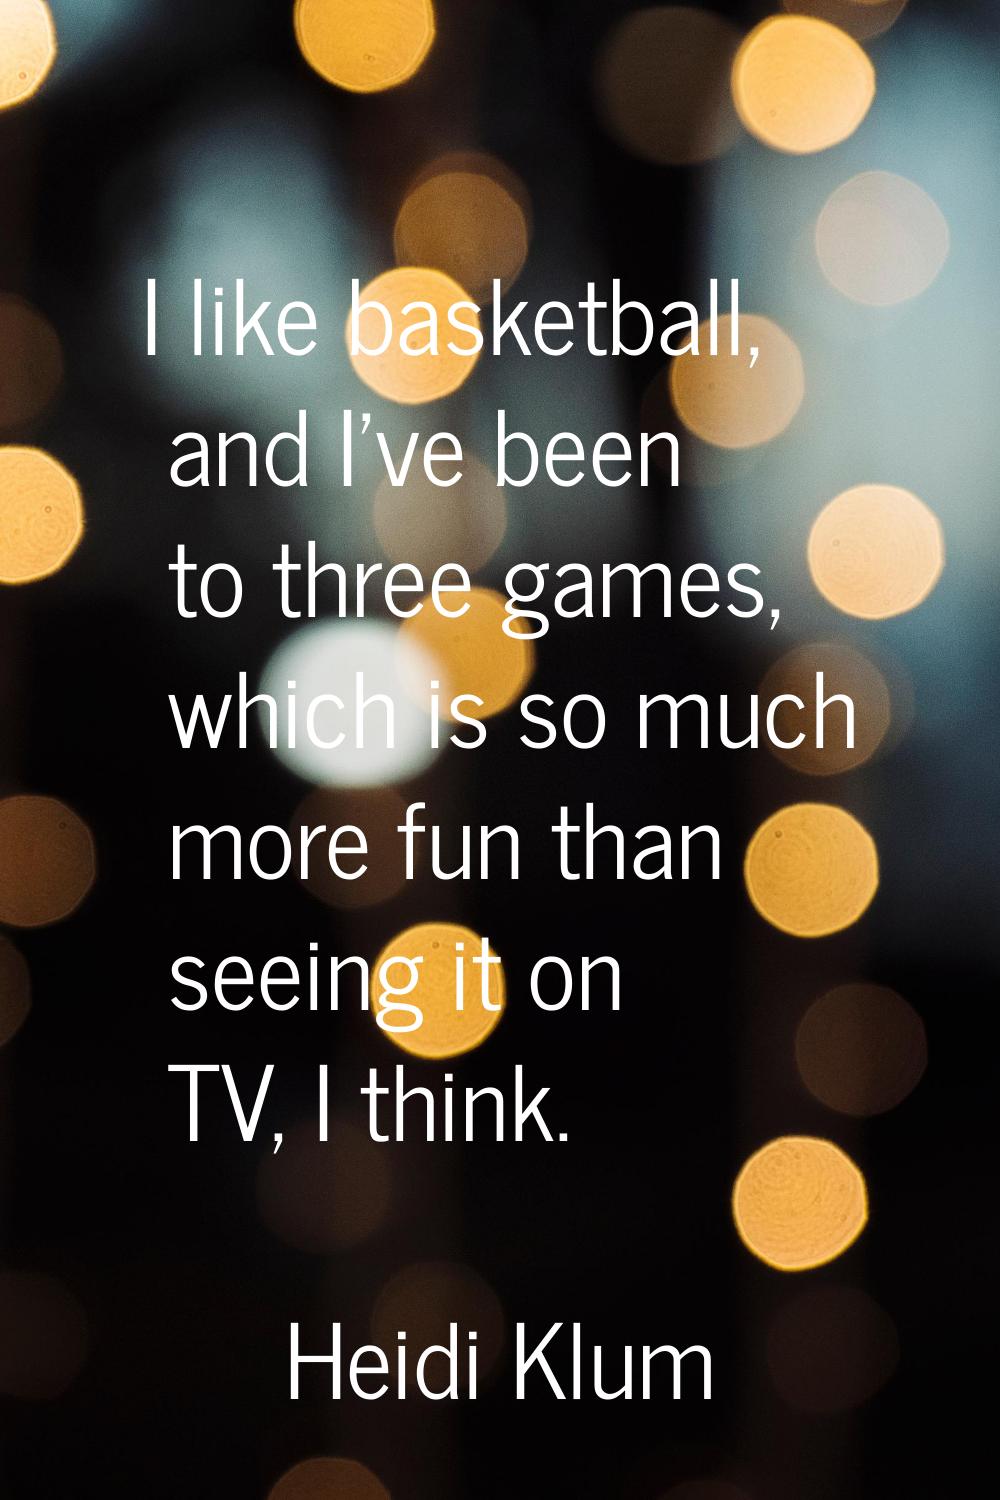 I like basketball, and I've been to three games, which is so much more fun than seeing it on TV, I 